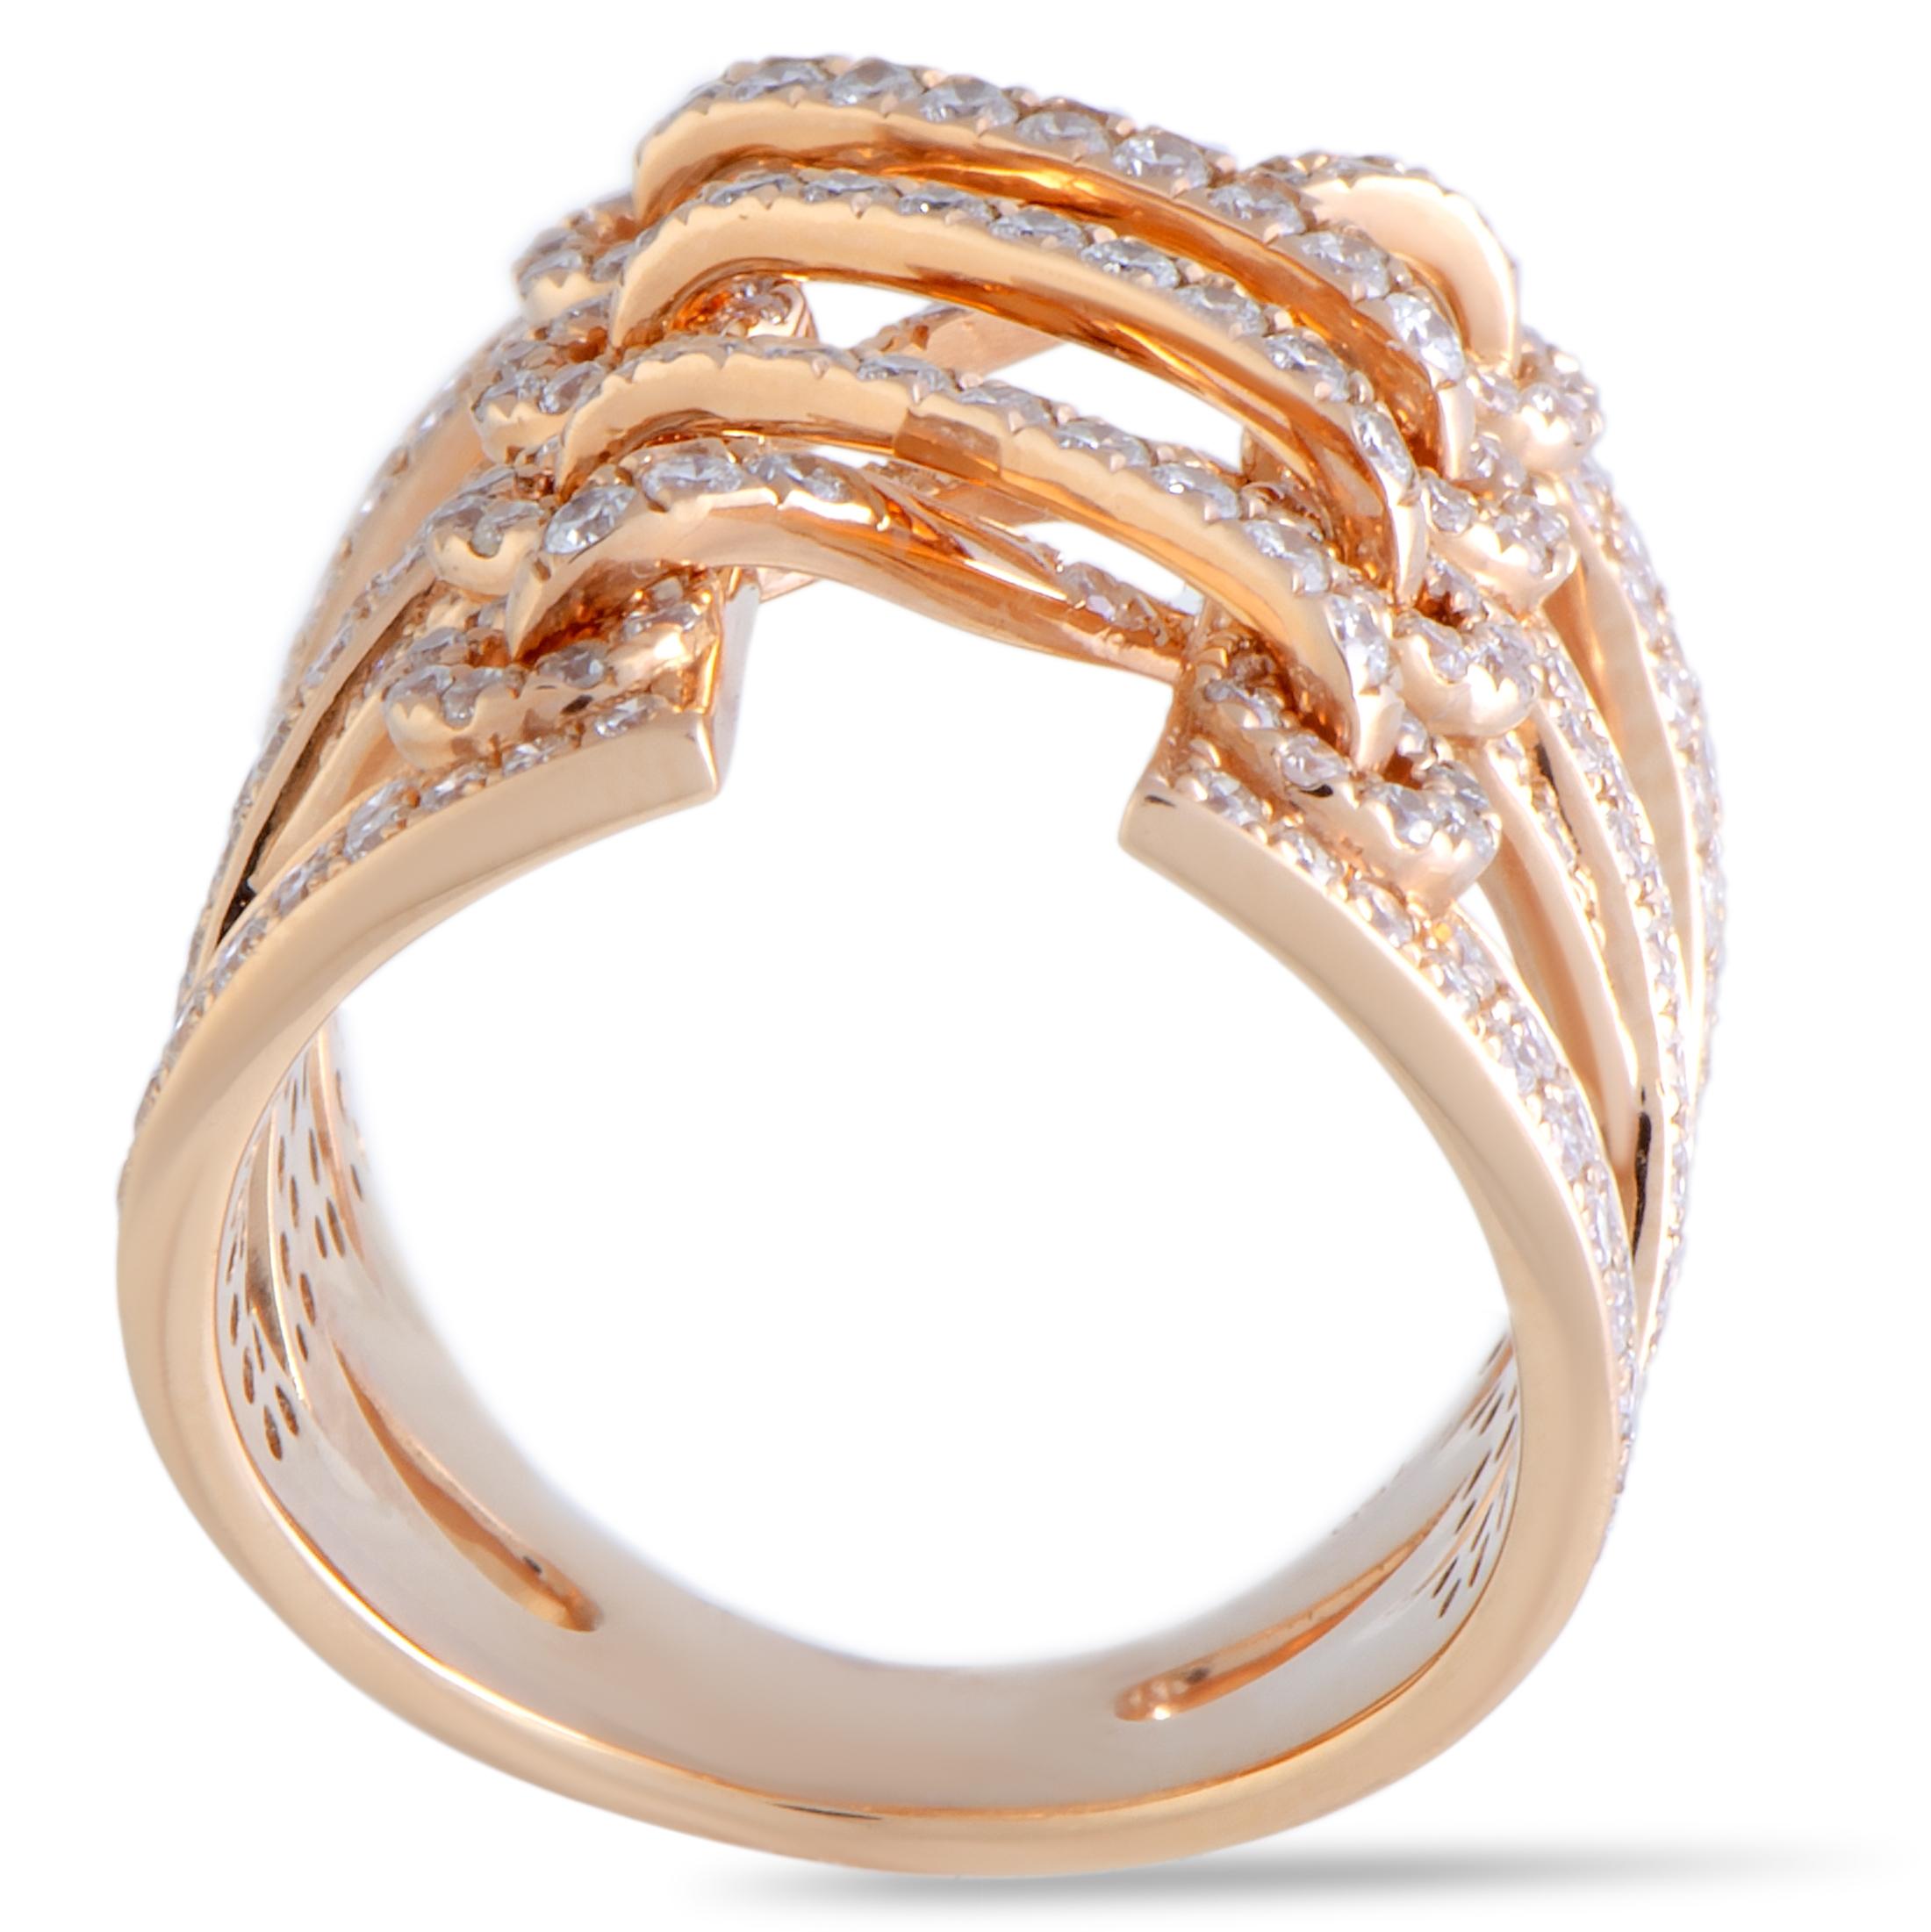 With a stunningly offbeat design reminiscent of a corset, this fabulous  ring will give an exquisitely fashionable appeal to any ensemble of yours. The ring is splendidly made of feminine 18K rose gold and it is luxuriously embellished with